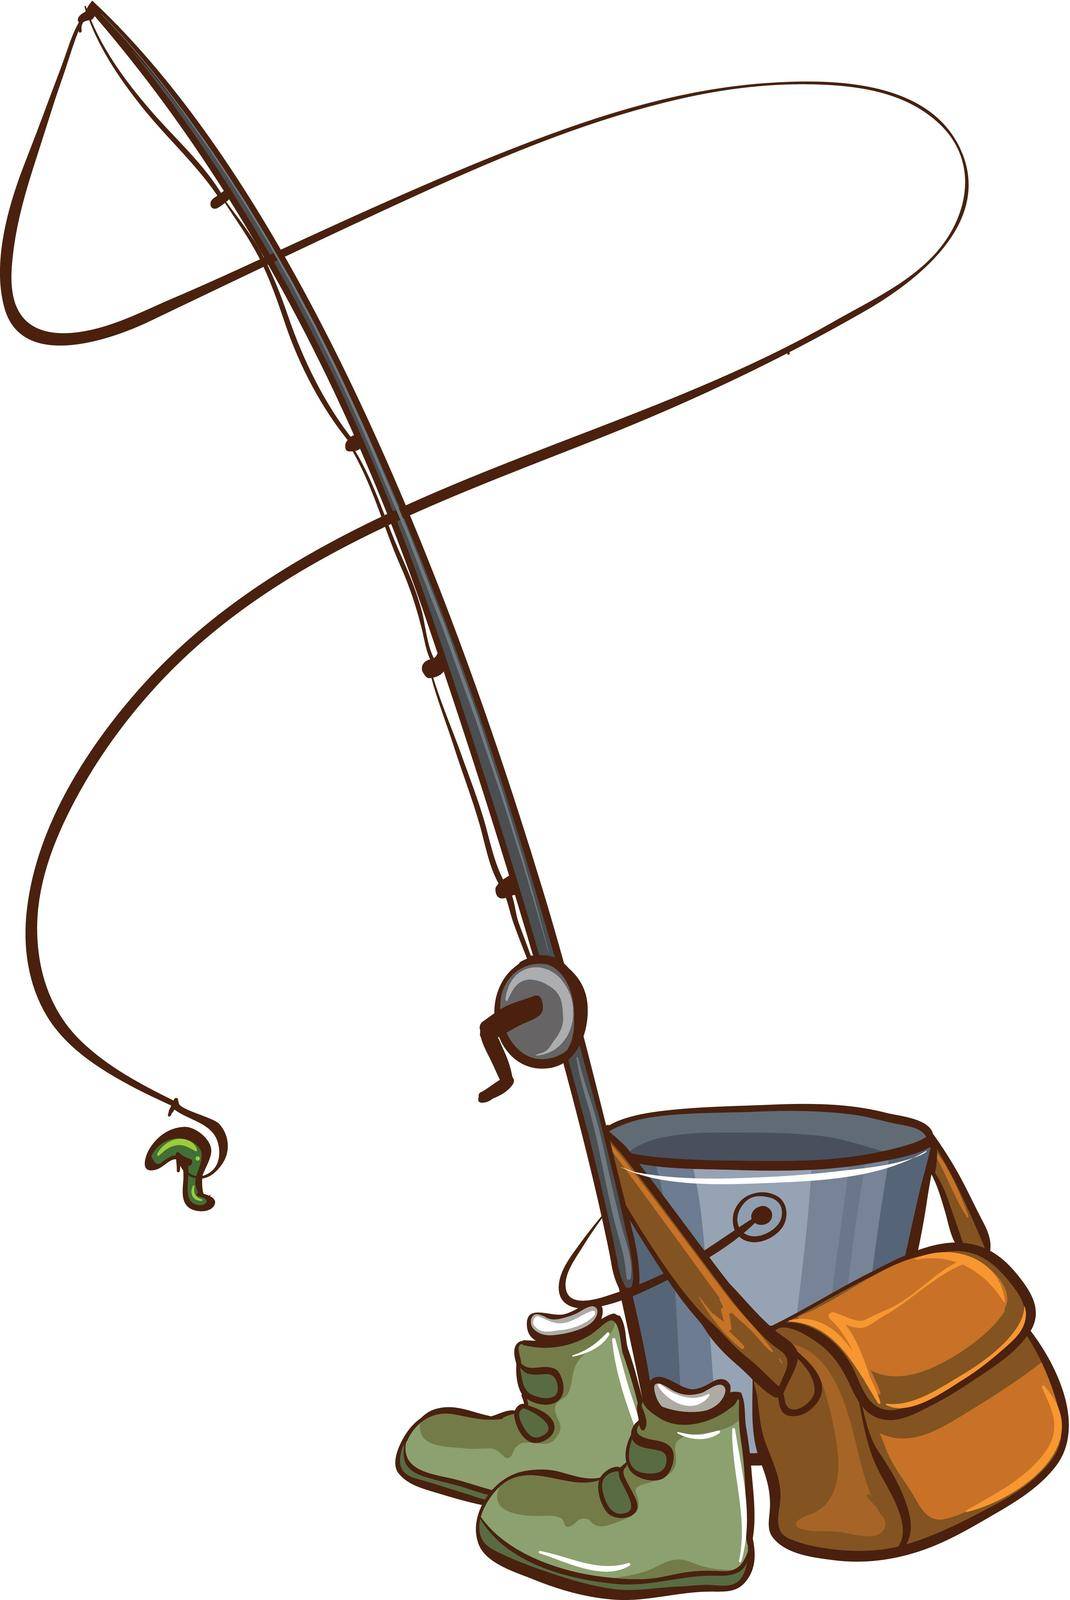 Materials used for fishing on a white background